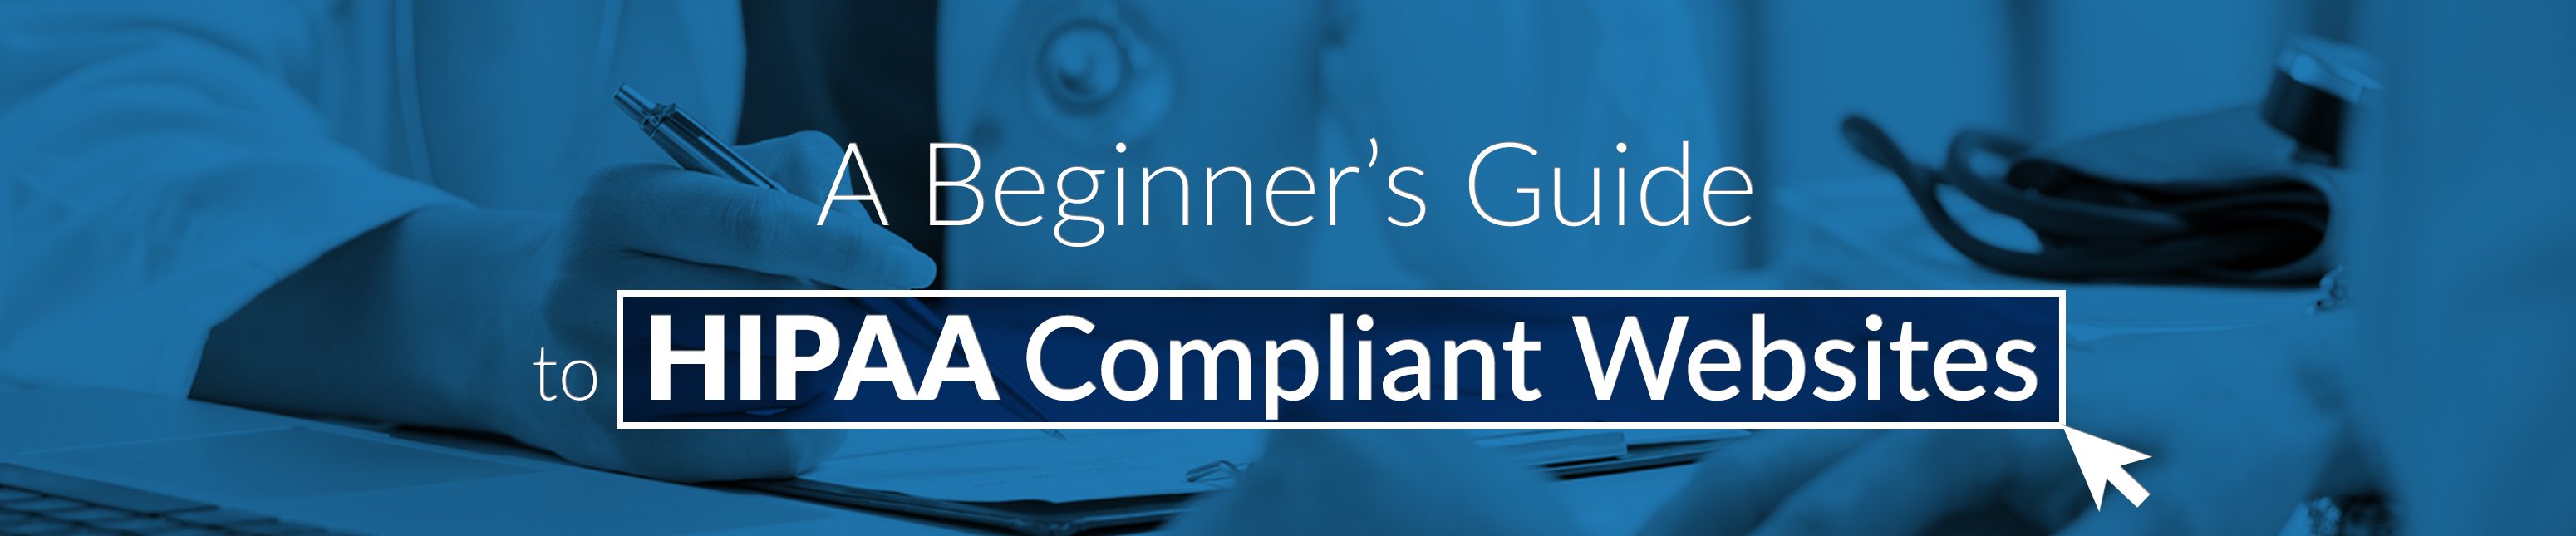 Beginner's Guide to HIPAA Compliant Websites